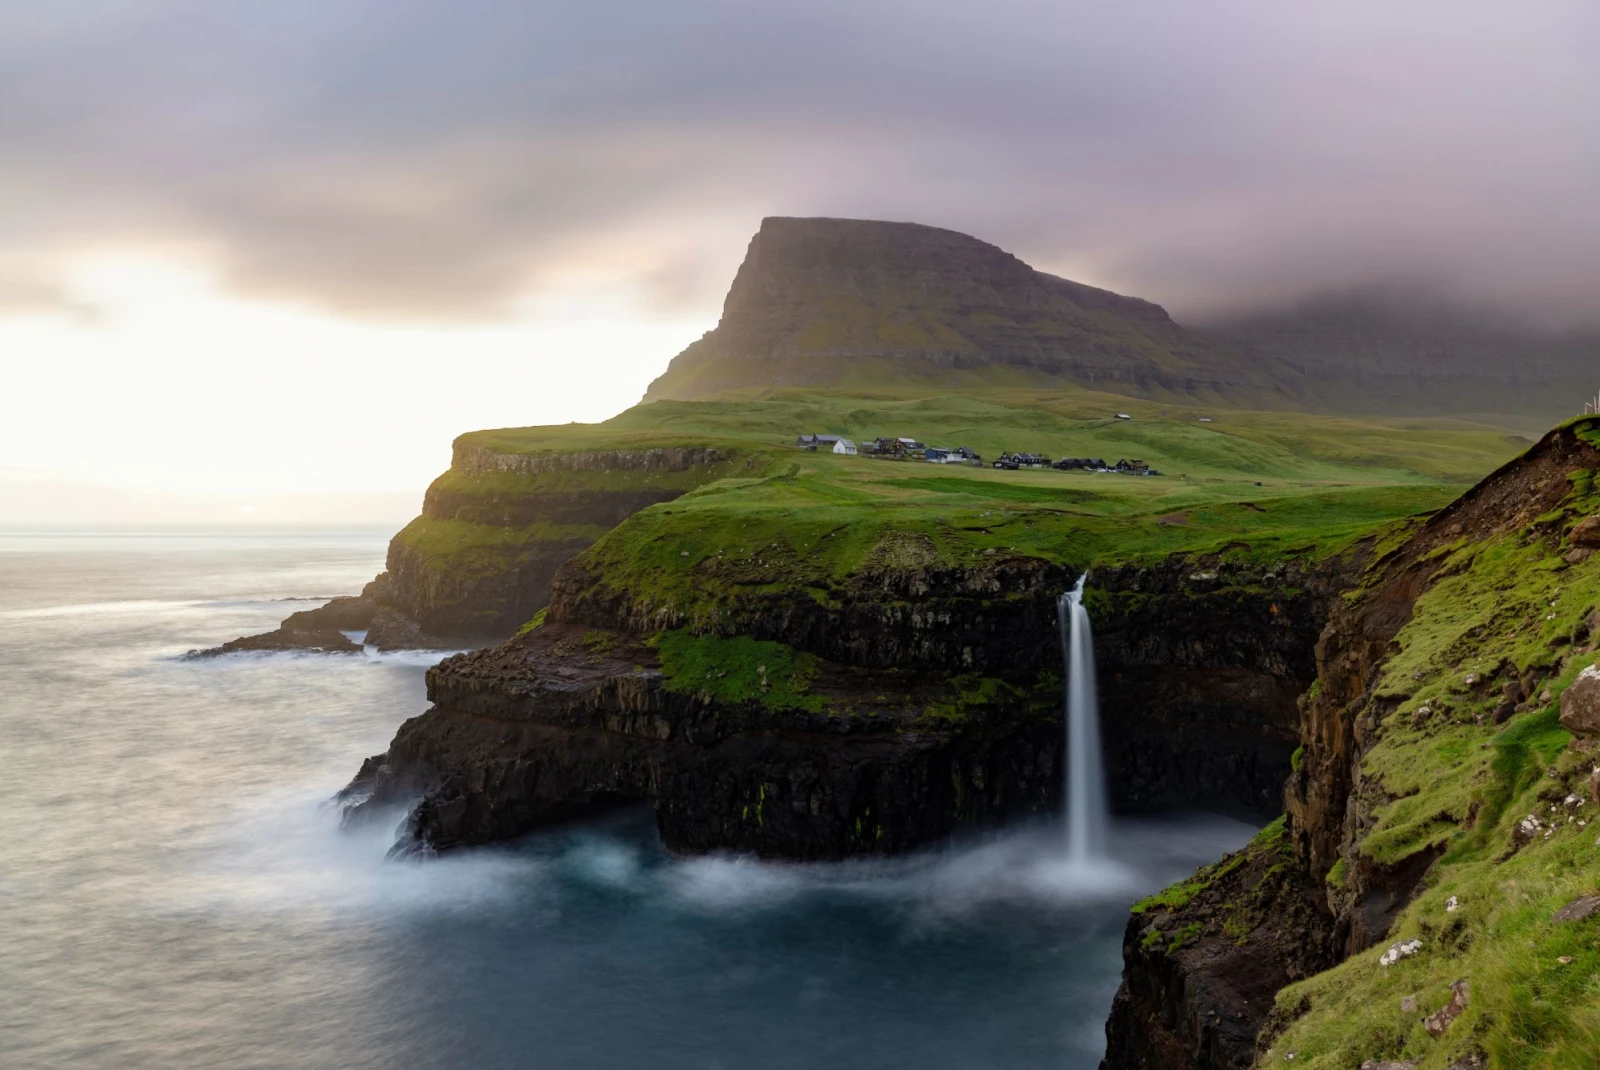 dramatic single waterfall off a grassy cliff into the ocean on a cloudy day at sundown